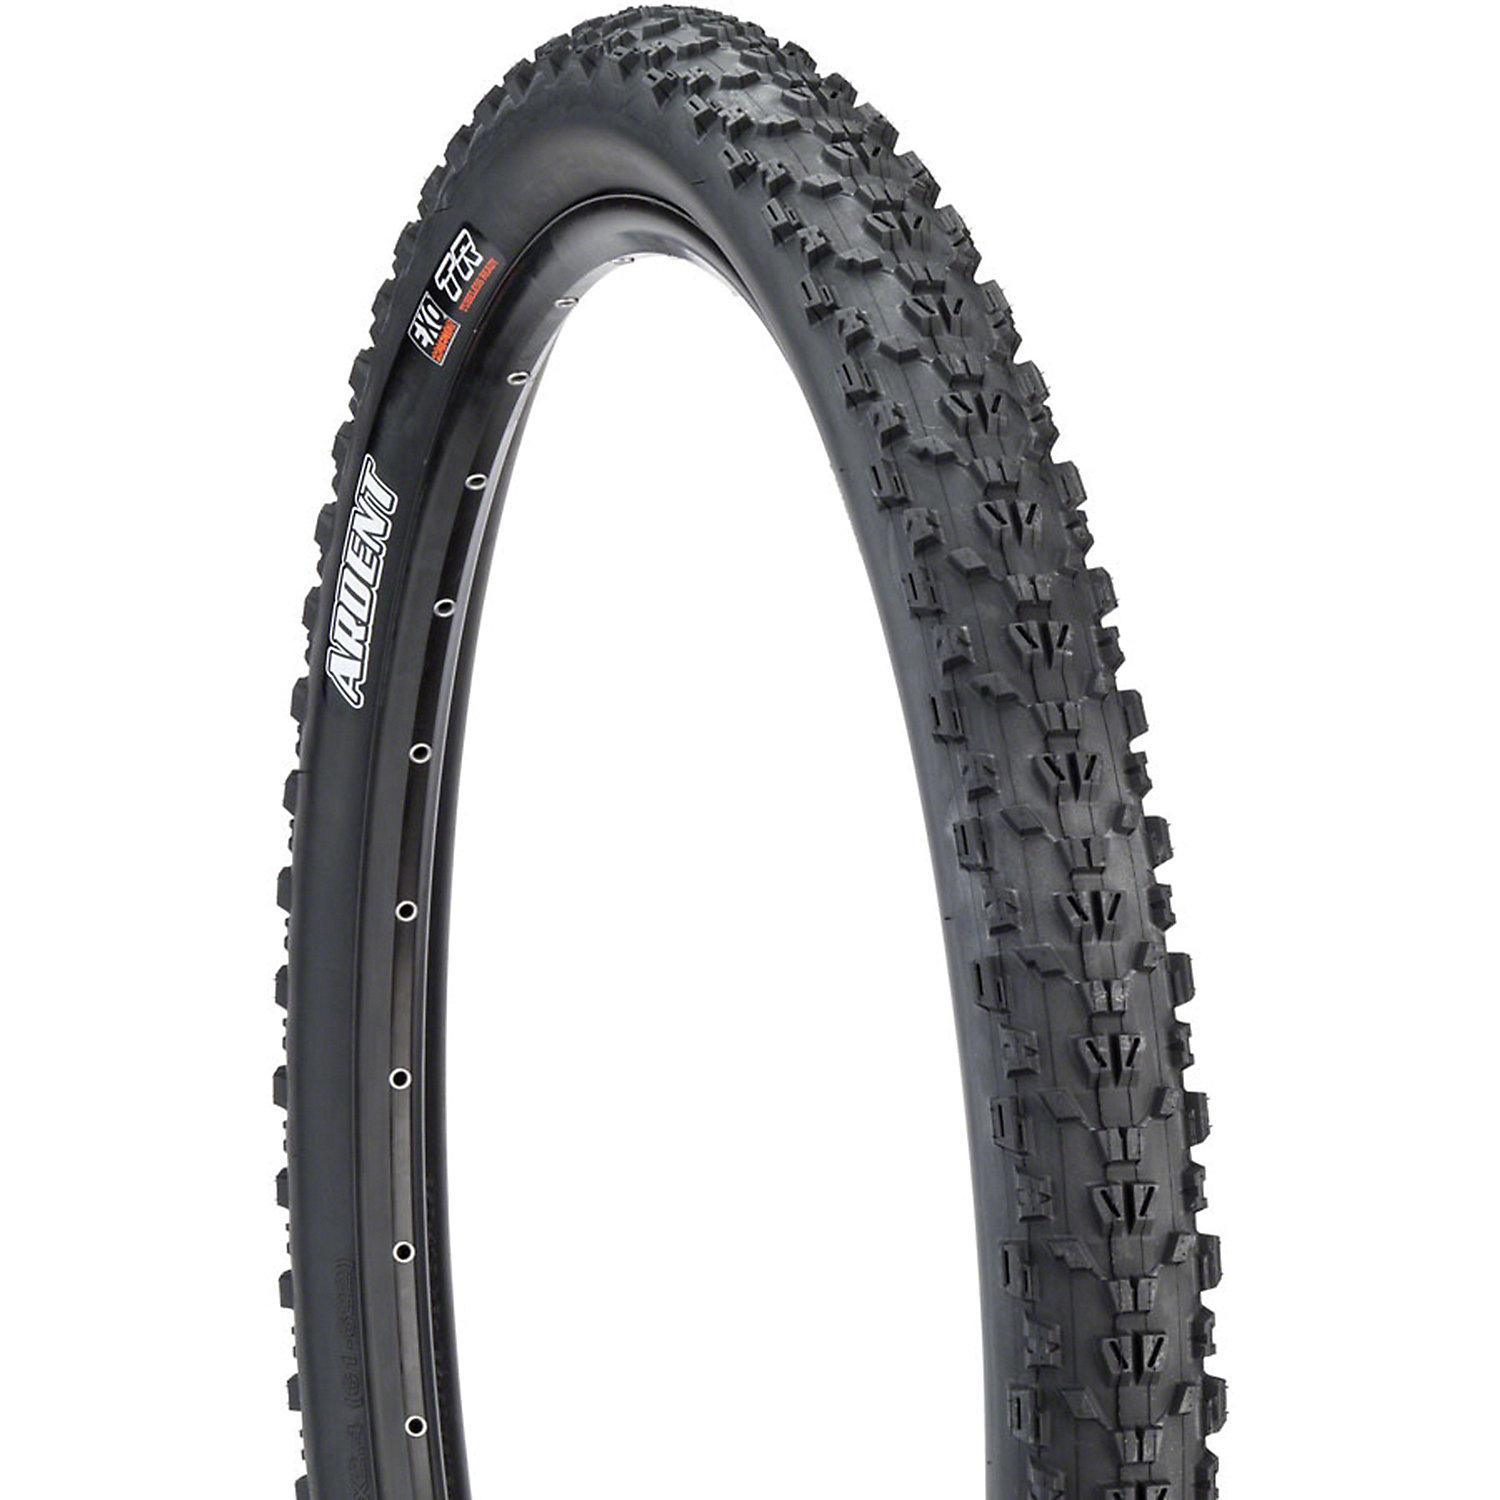 Maxxis Ardent 29 Tire